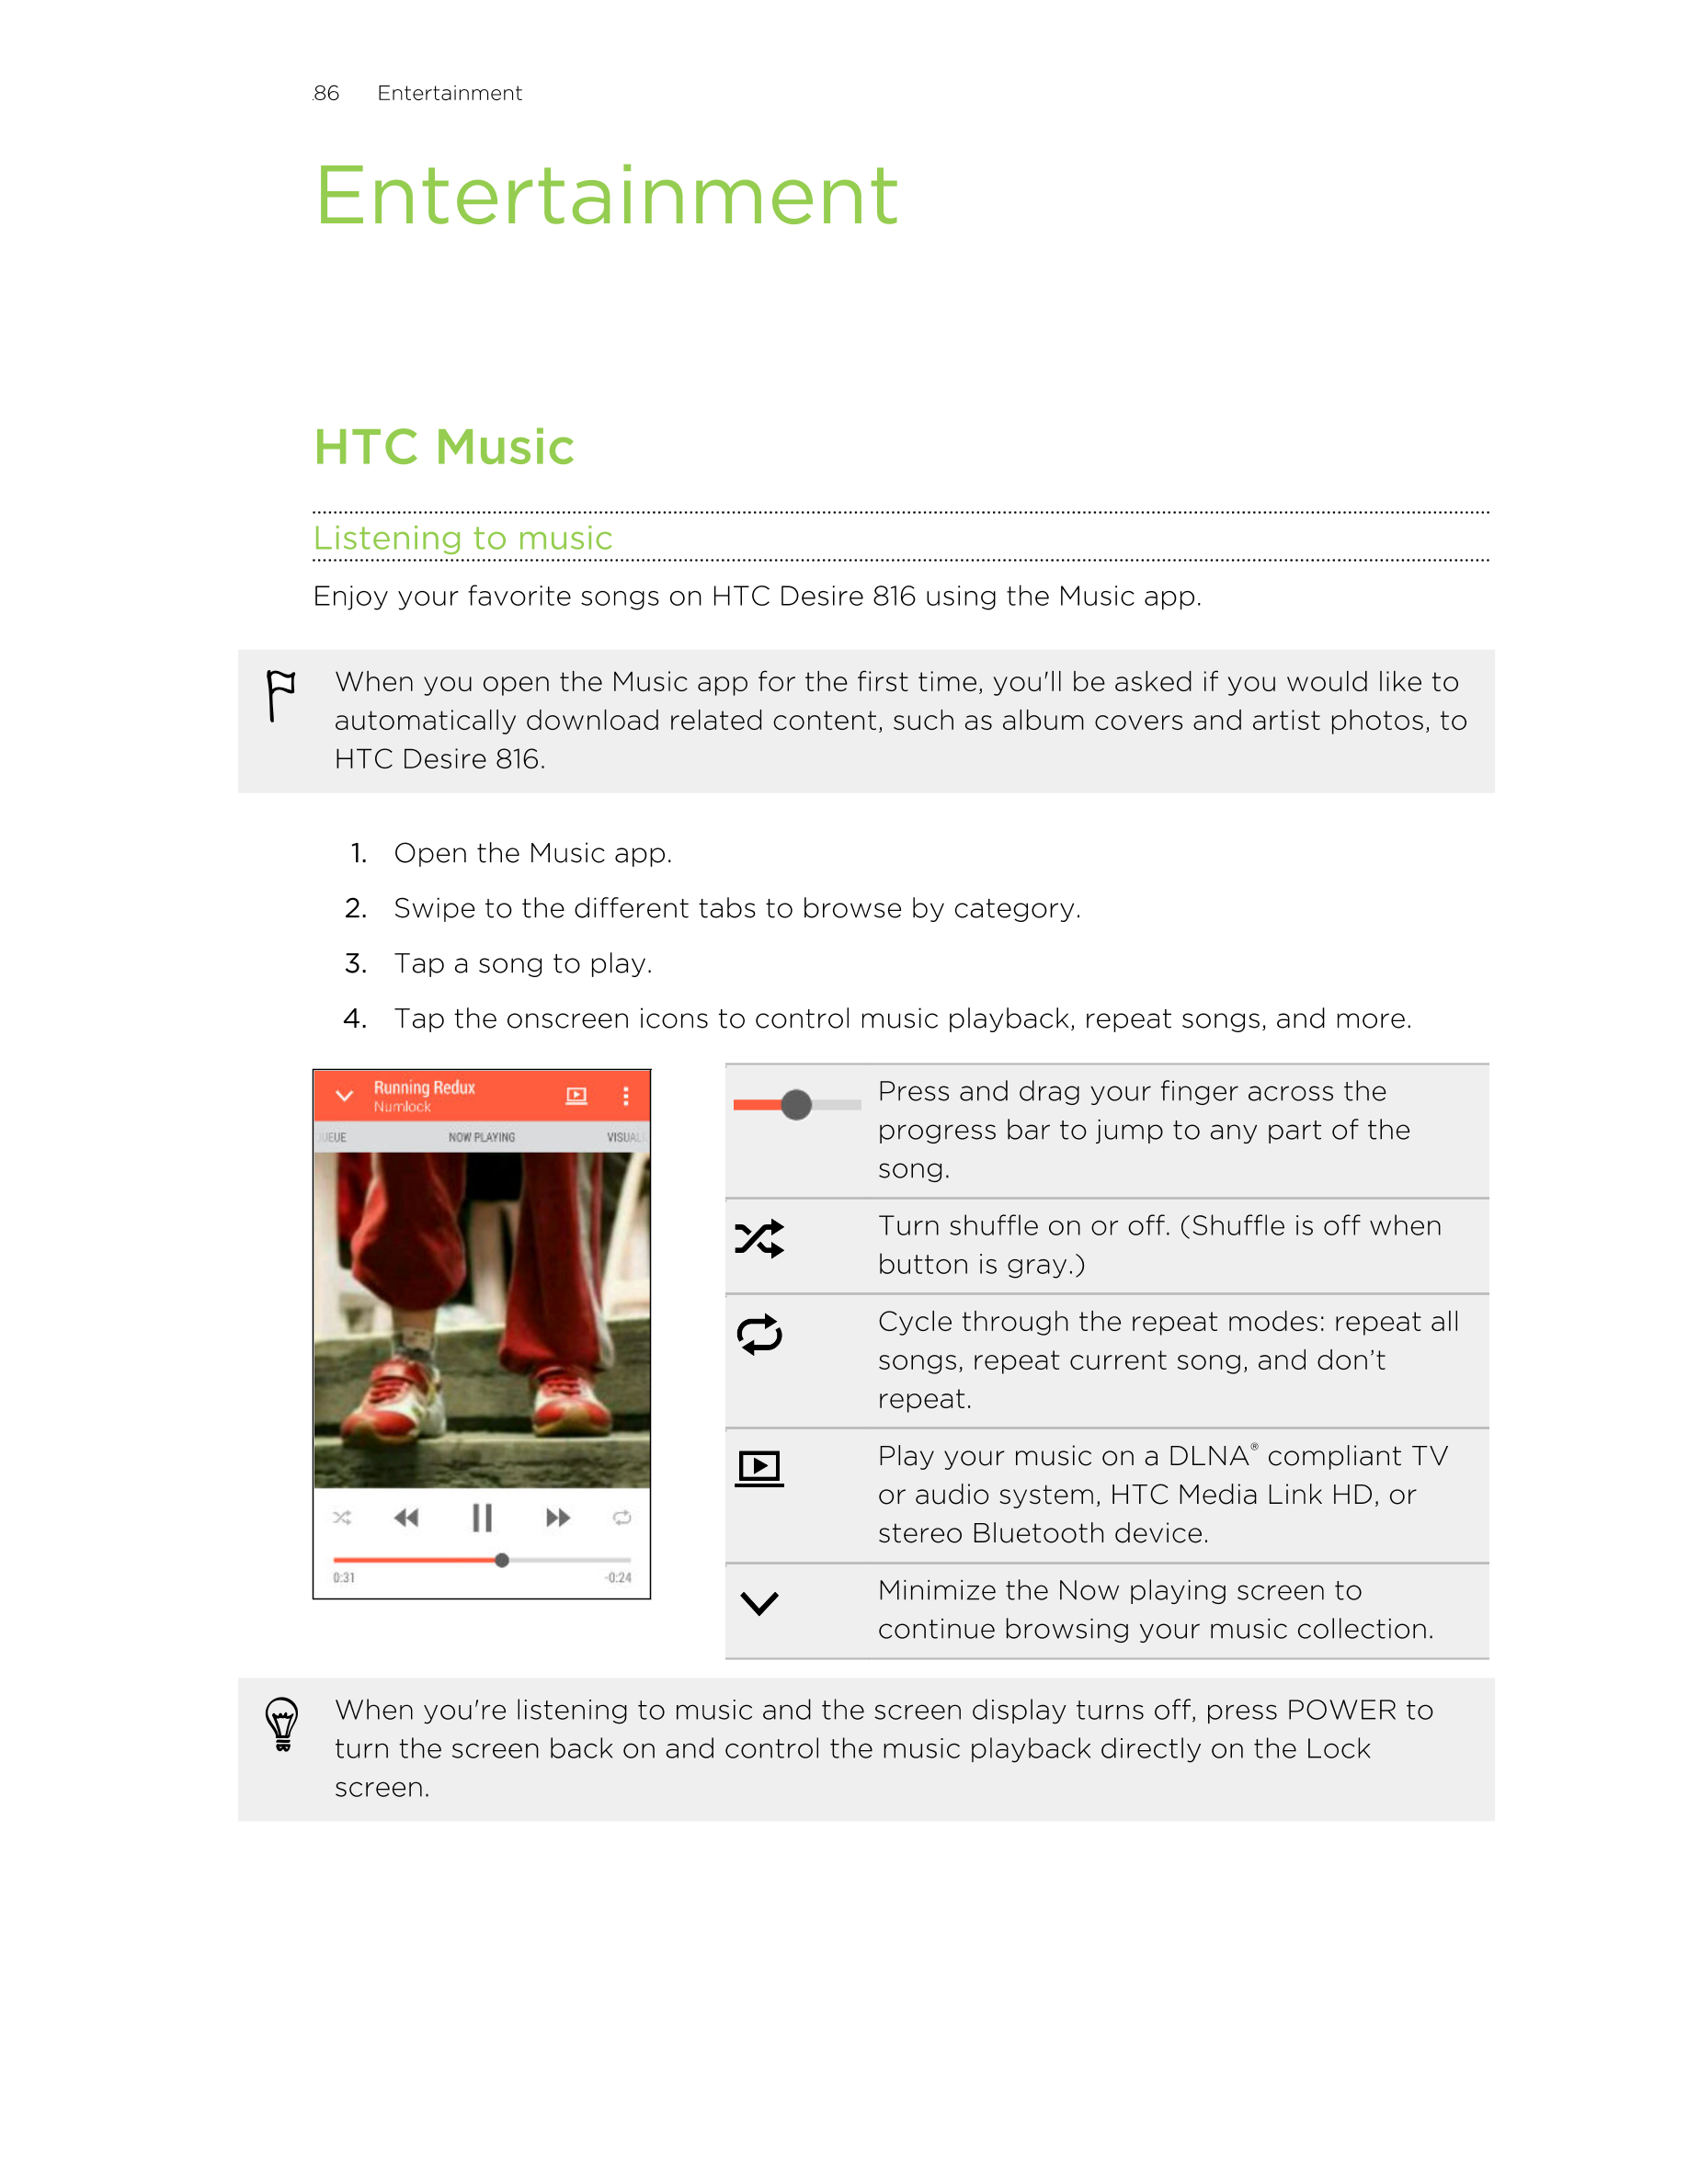 86      Entertainment
Entertainment
HTC Music
Listening to music
Enjoy your favorite songs on HTC Desire 816 using the Music app